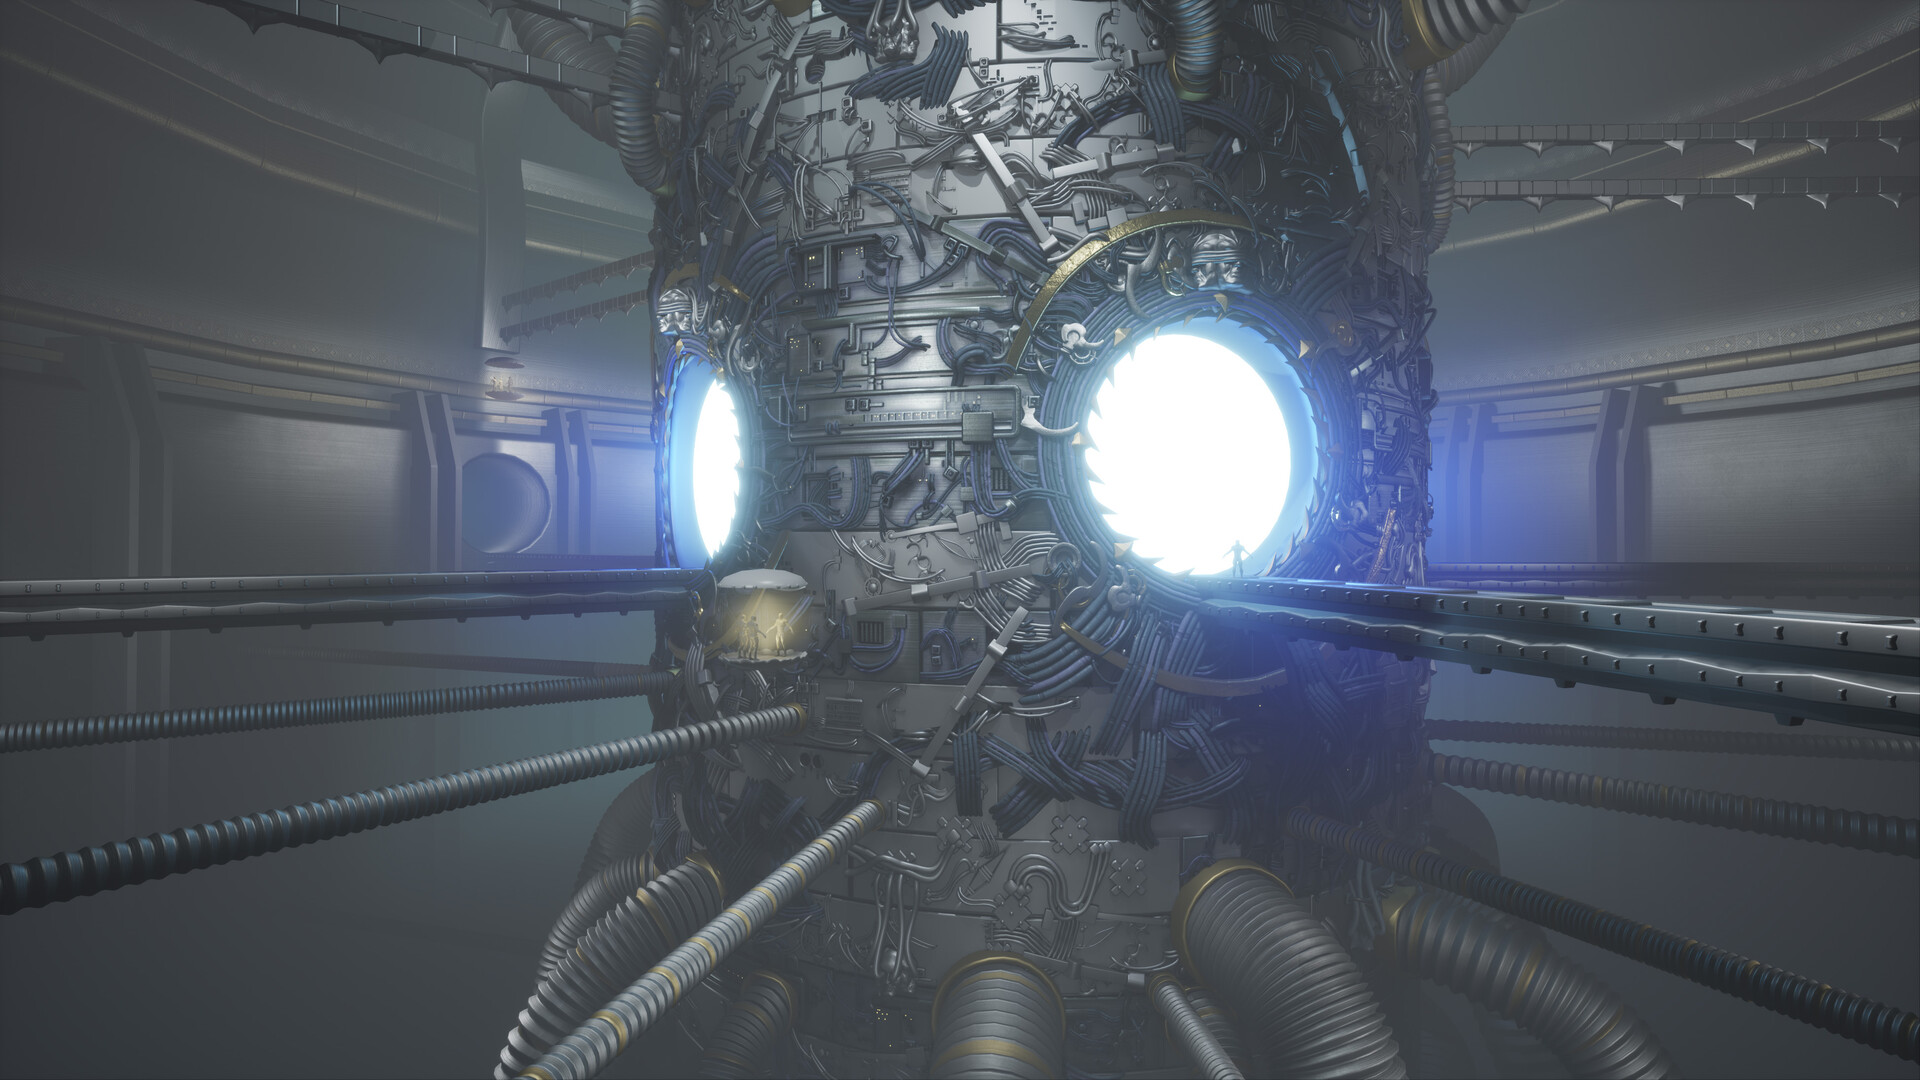 Main UE4 camera shot, showing the portal cylinder. Material and texture work can be seen, with the greebles now having metallic shine while cables appear rubber and blue and there are some golden trims scattered too.